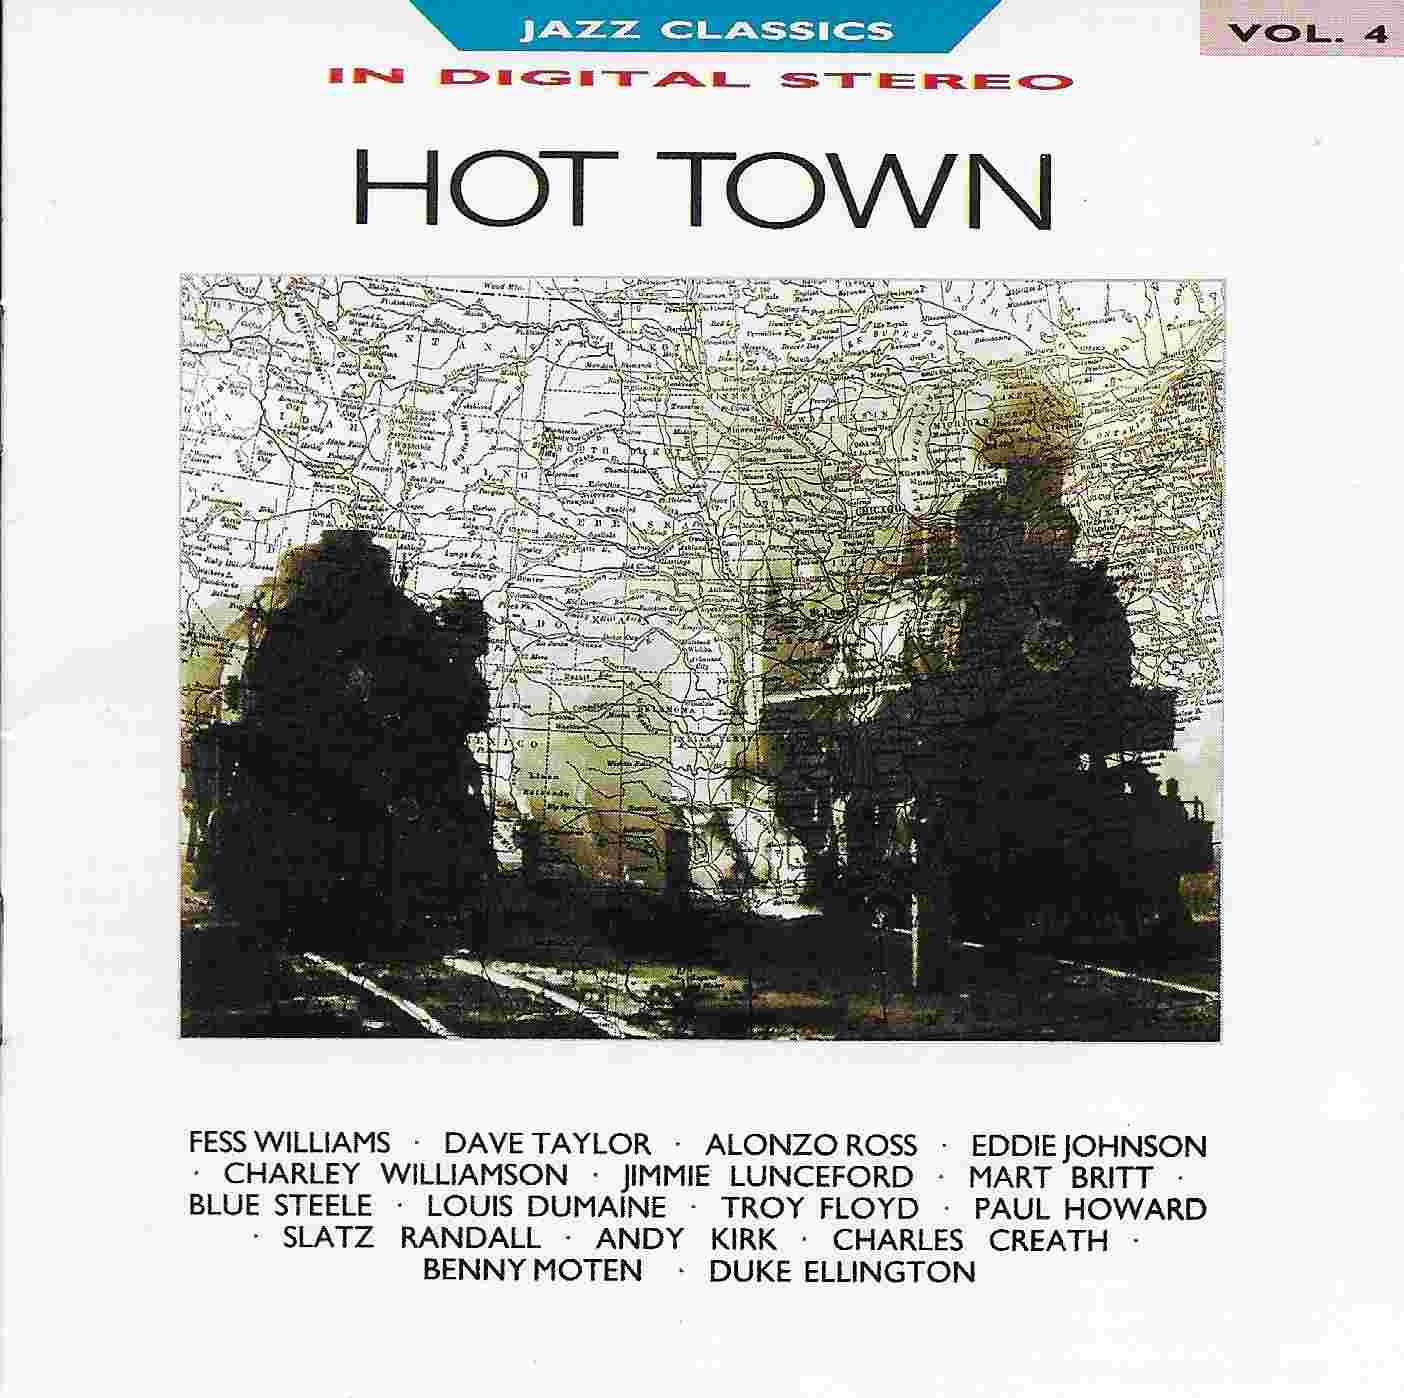 Picture of BBCCD647 Jazz classics - Volume 4, Hot Town by artist Various from the BBC cds - Records and Tapes library